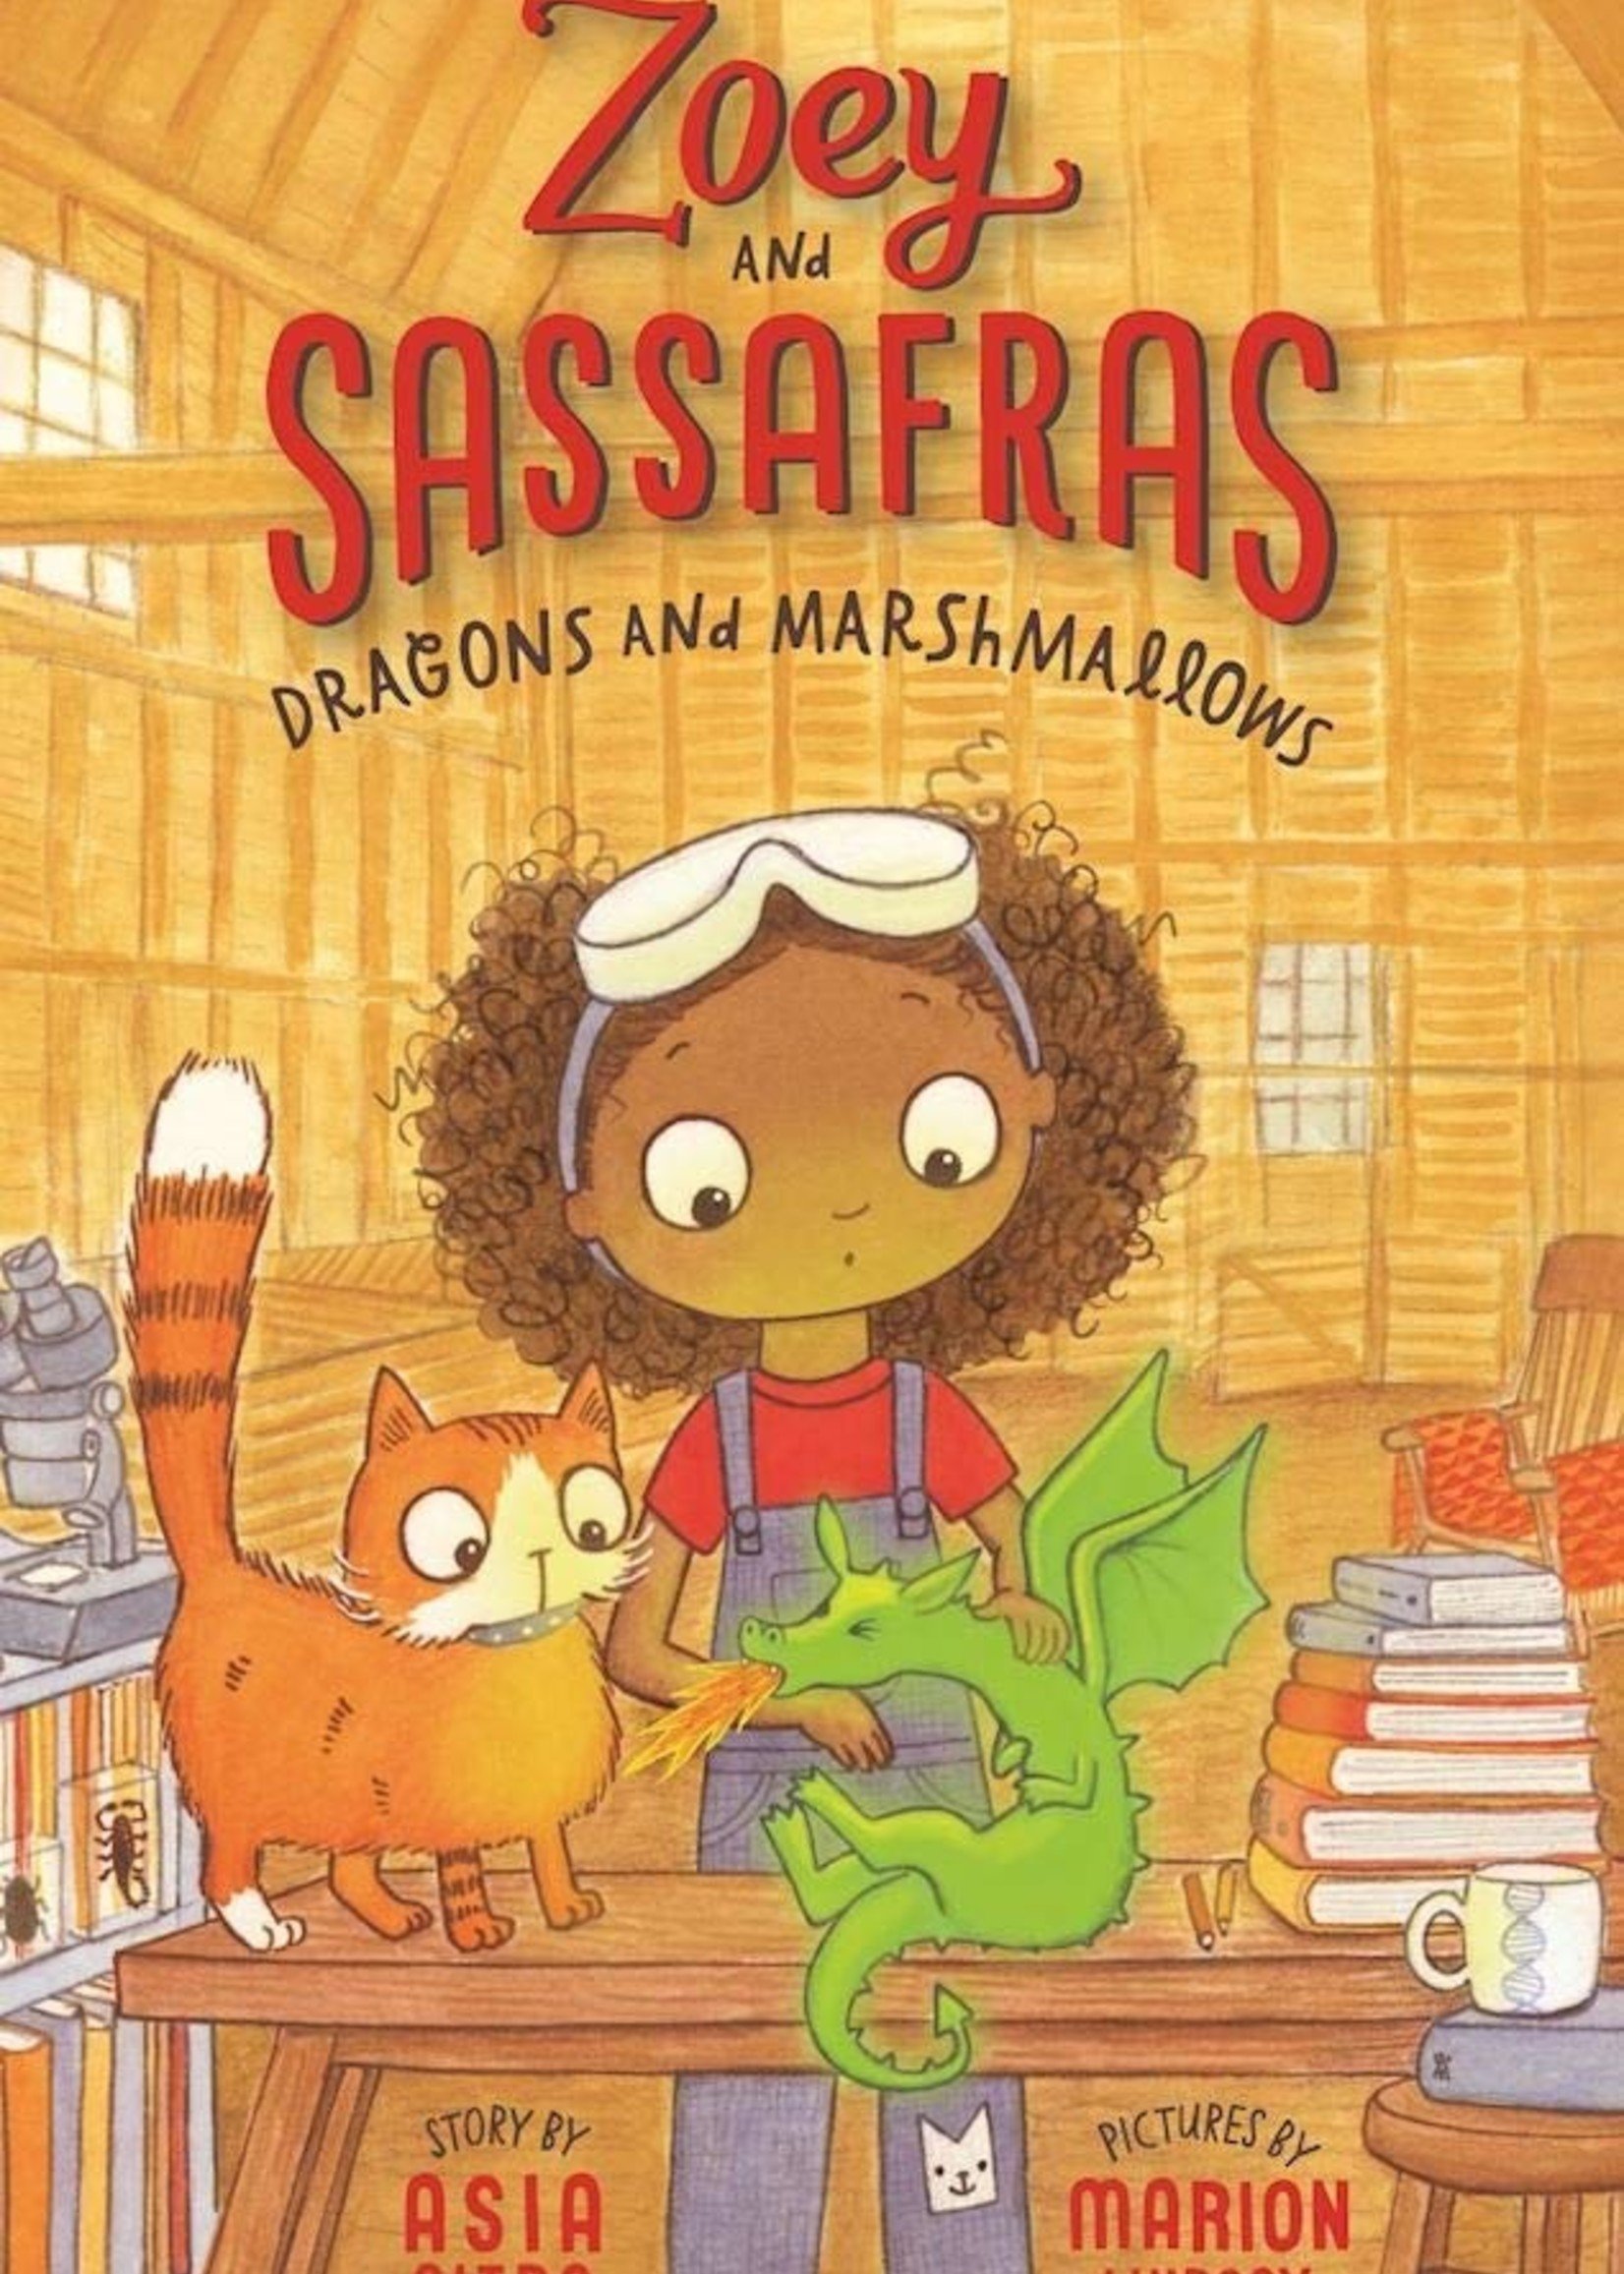 Zoey and Sassafras #01, Dragons and Marshmallows - Paperback